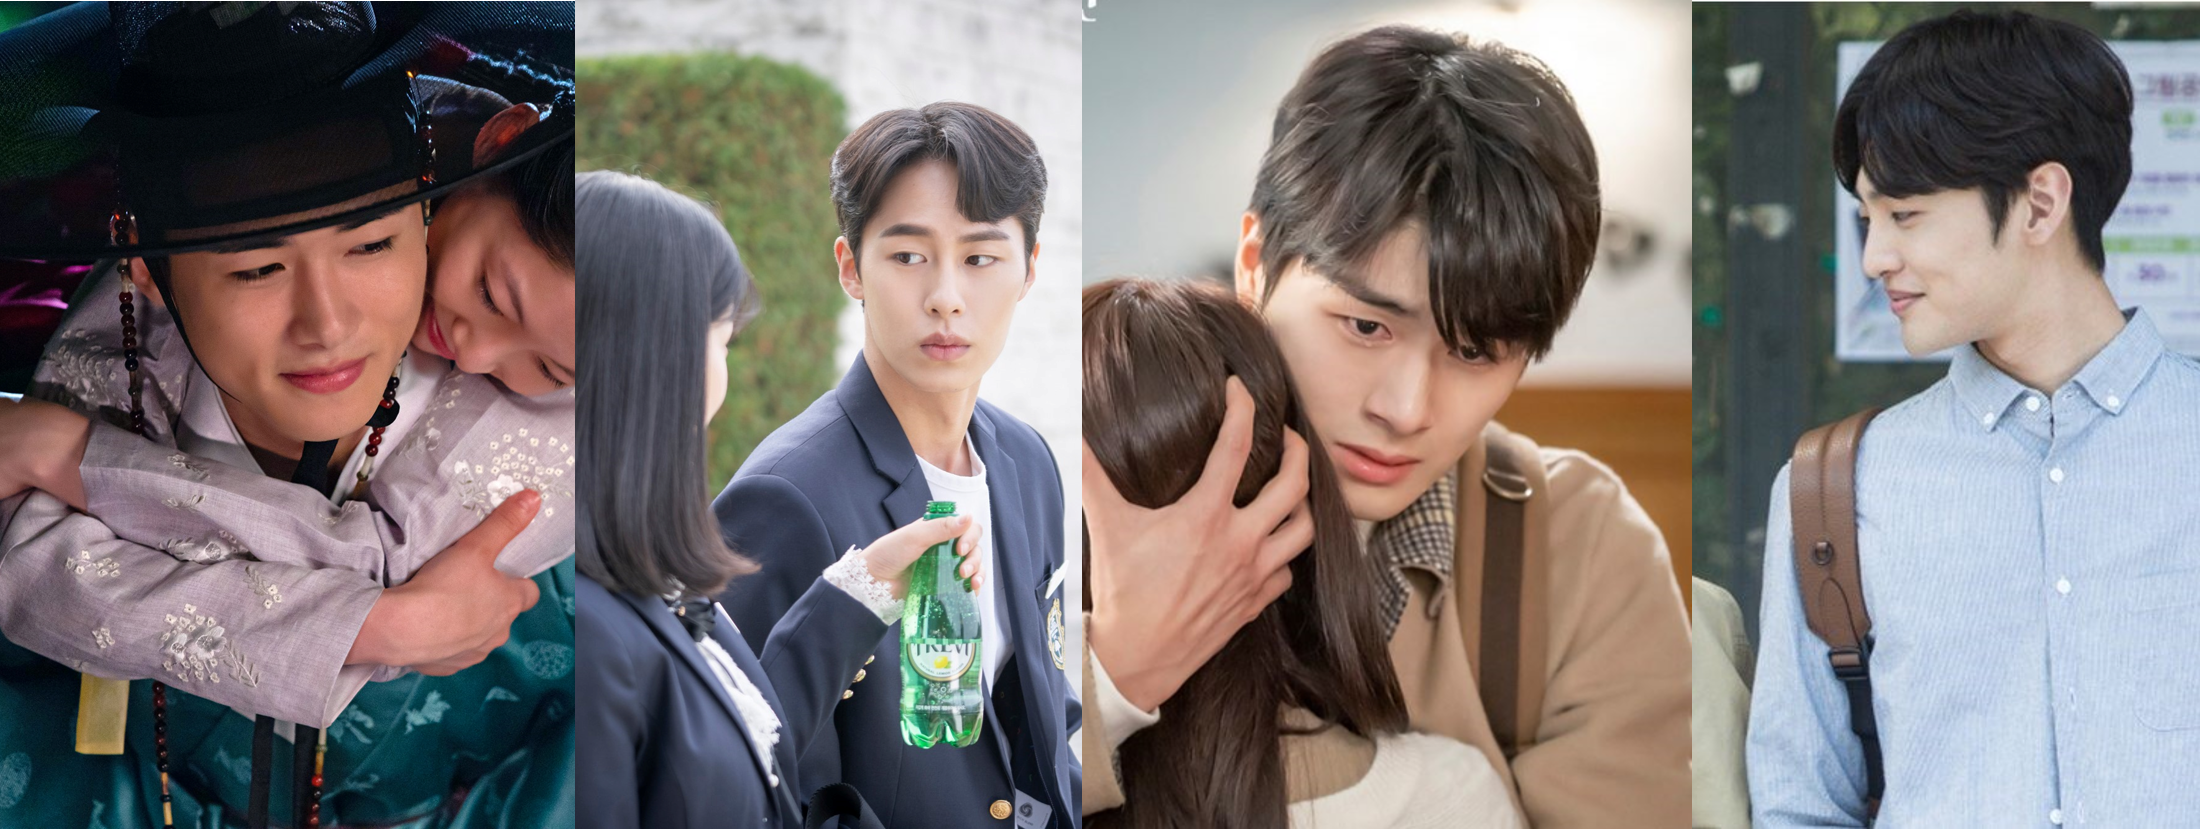 7 times second lead syndrome is real in Kdrama